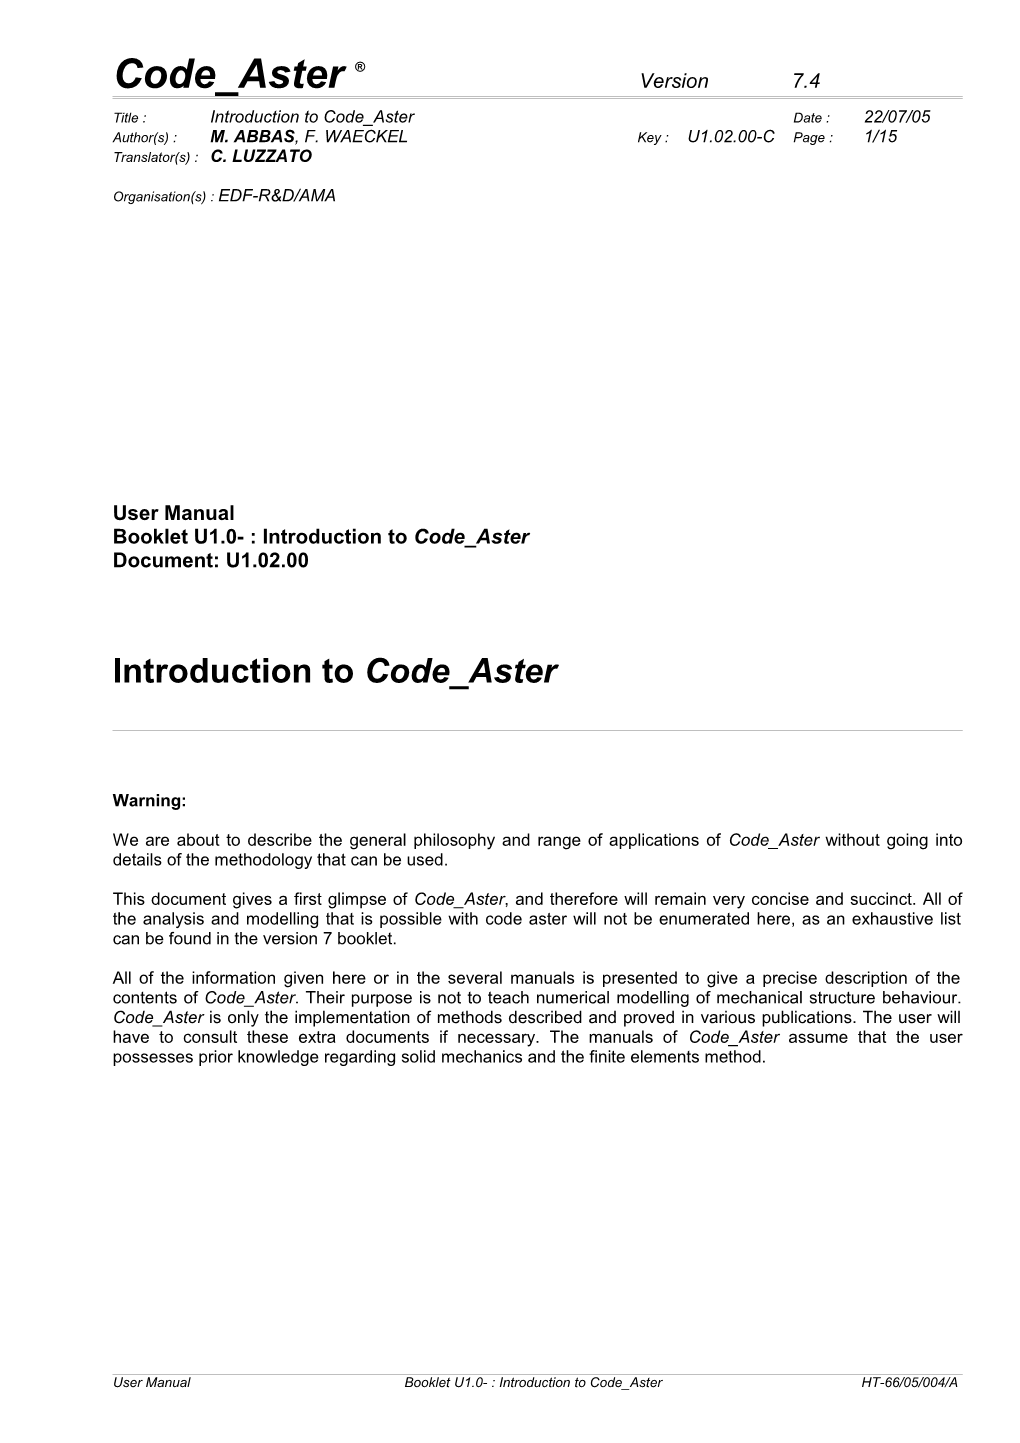 Introduction to Code Aster